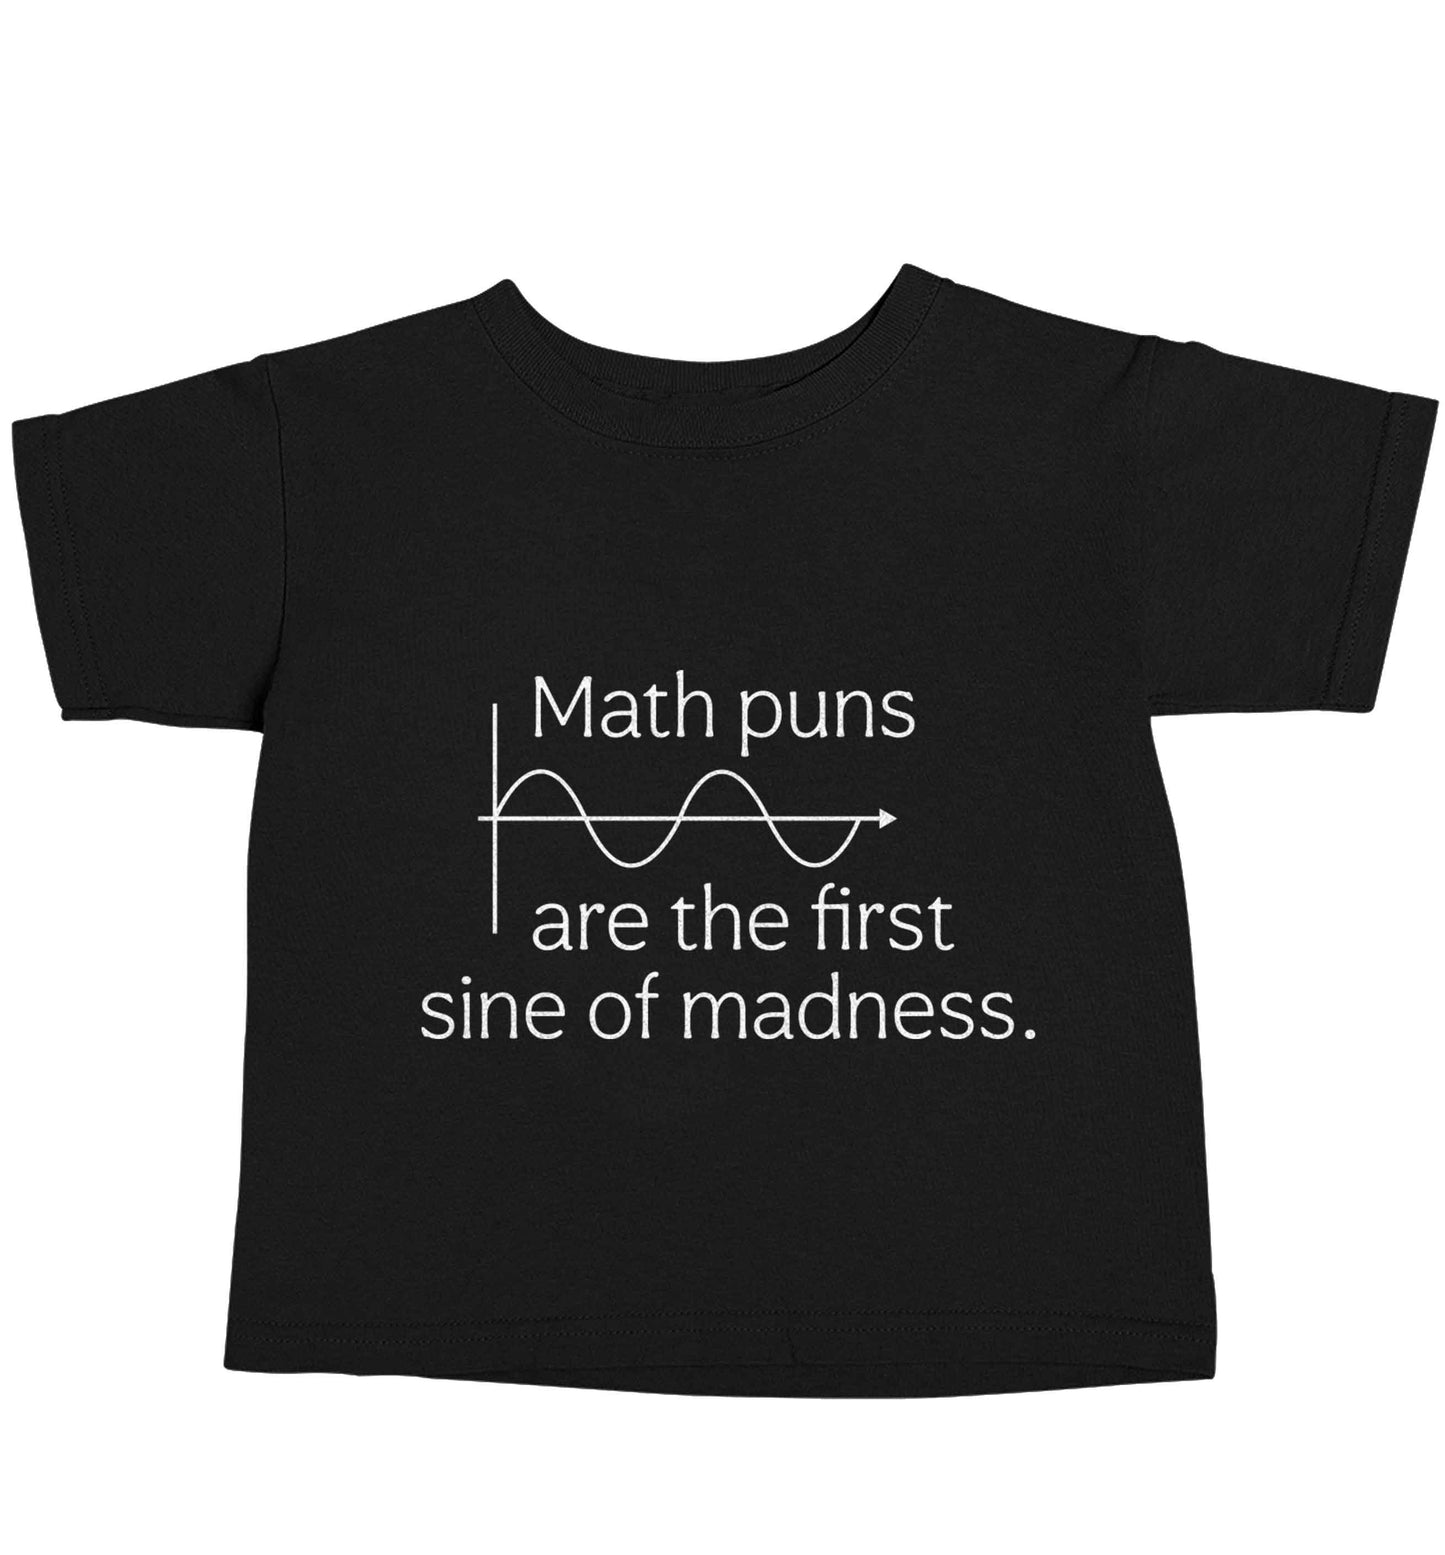 Math puns are the first sine of madness Black baby toddler Tshirt 2 years